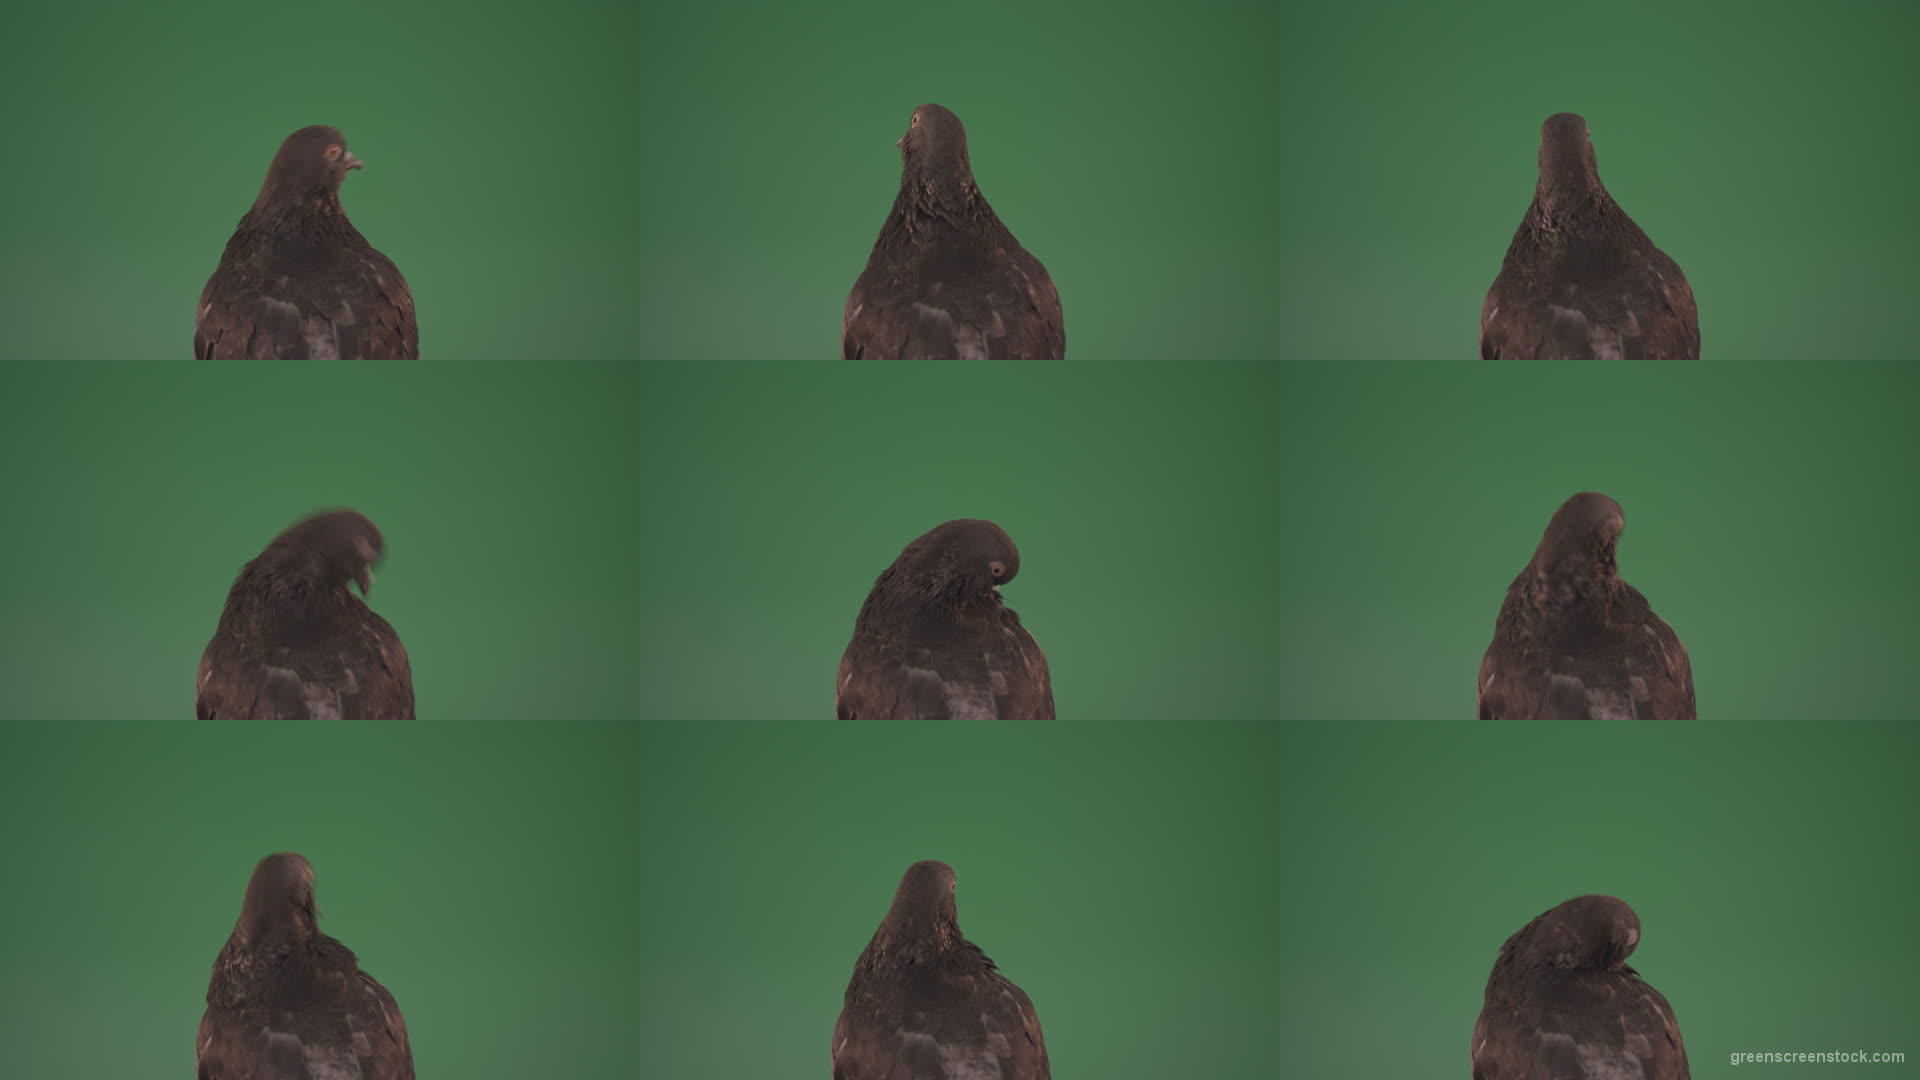 Sitting-wings-to-the-chicken-bird-home-pigeon-isolated-on-chromakey-background Green Screen Stock